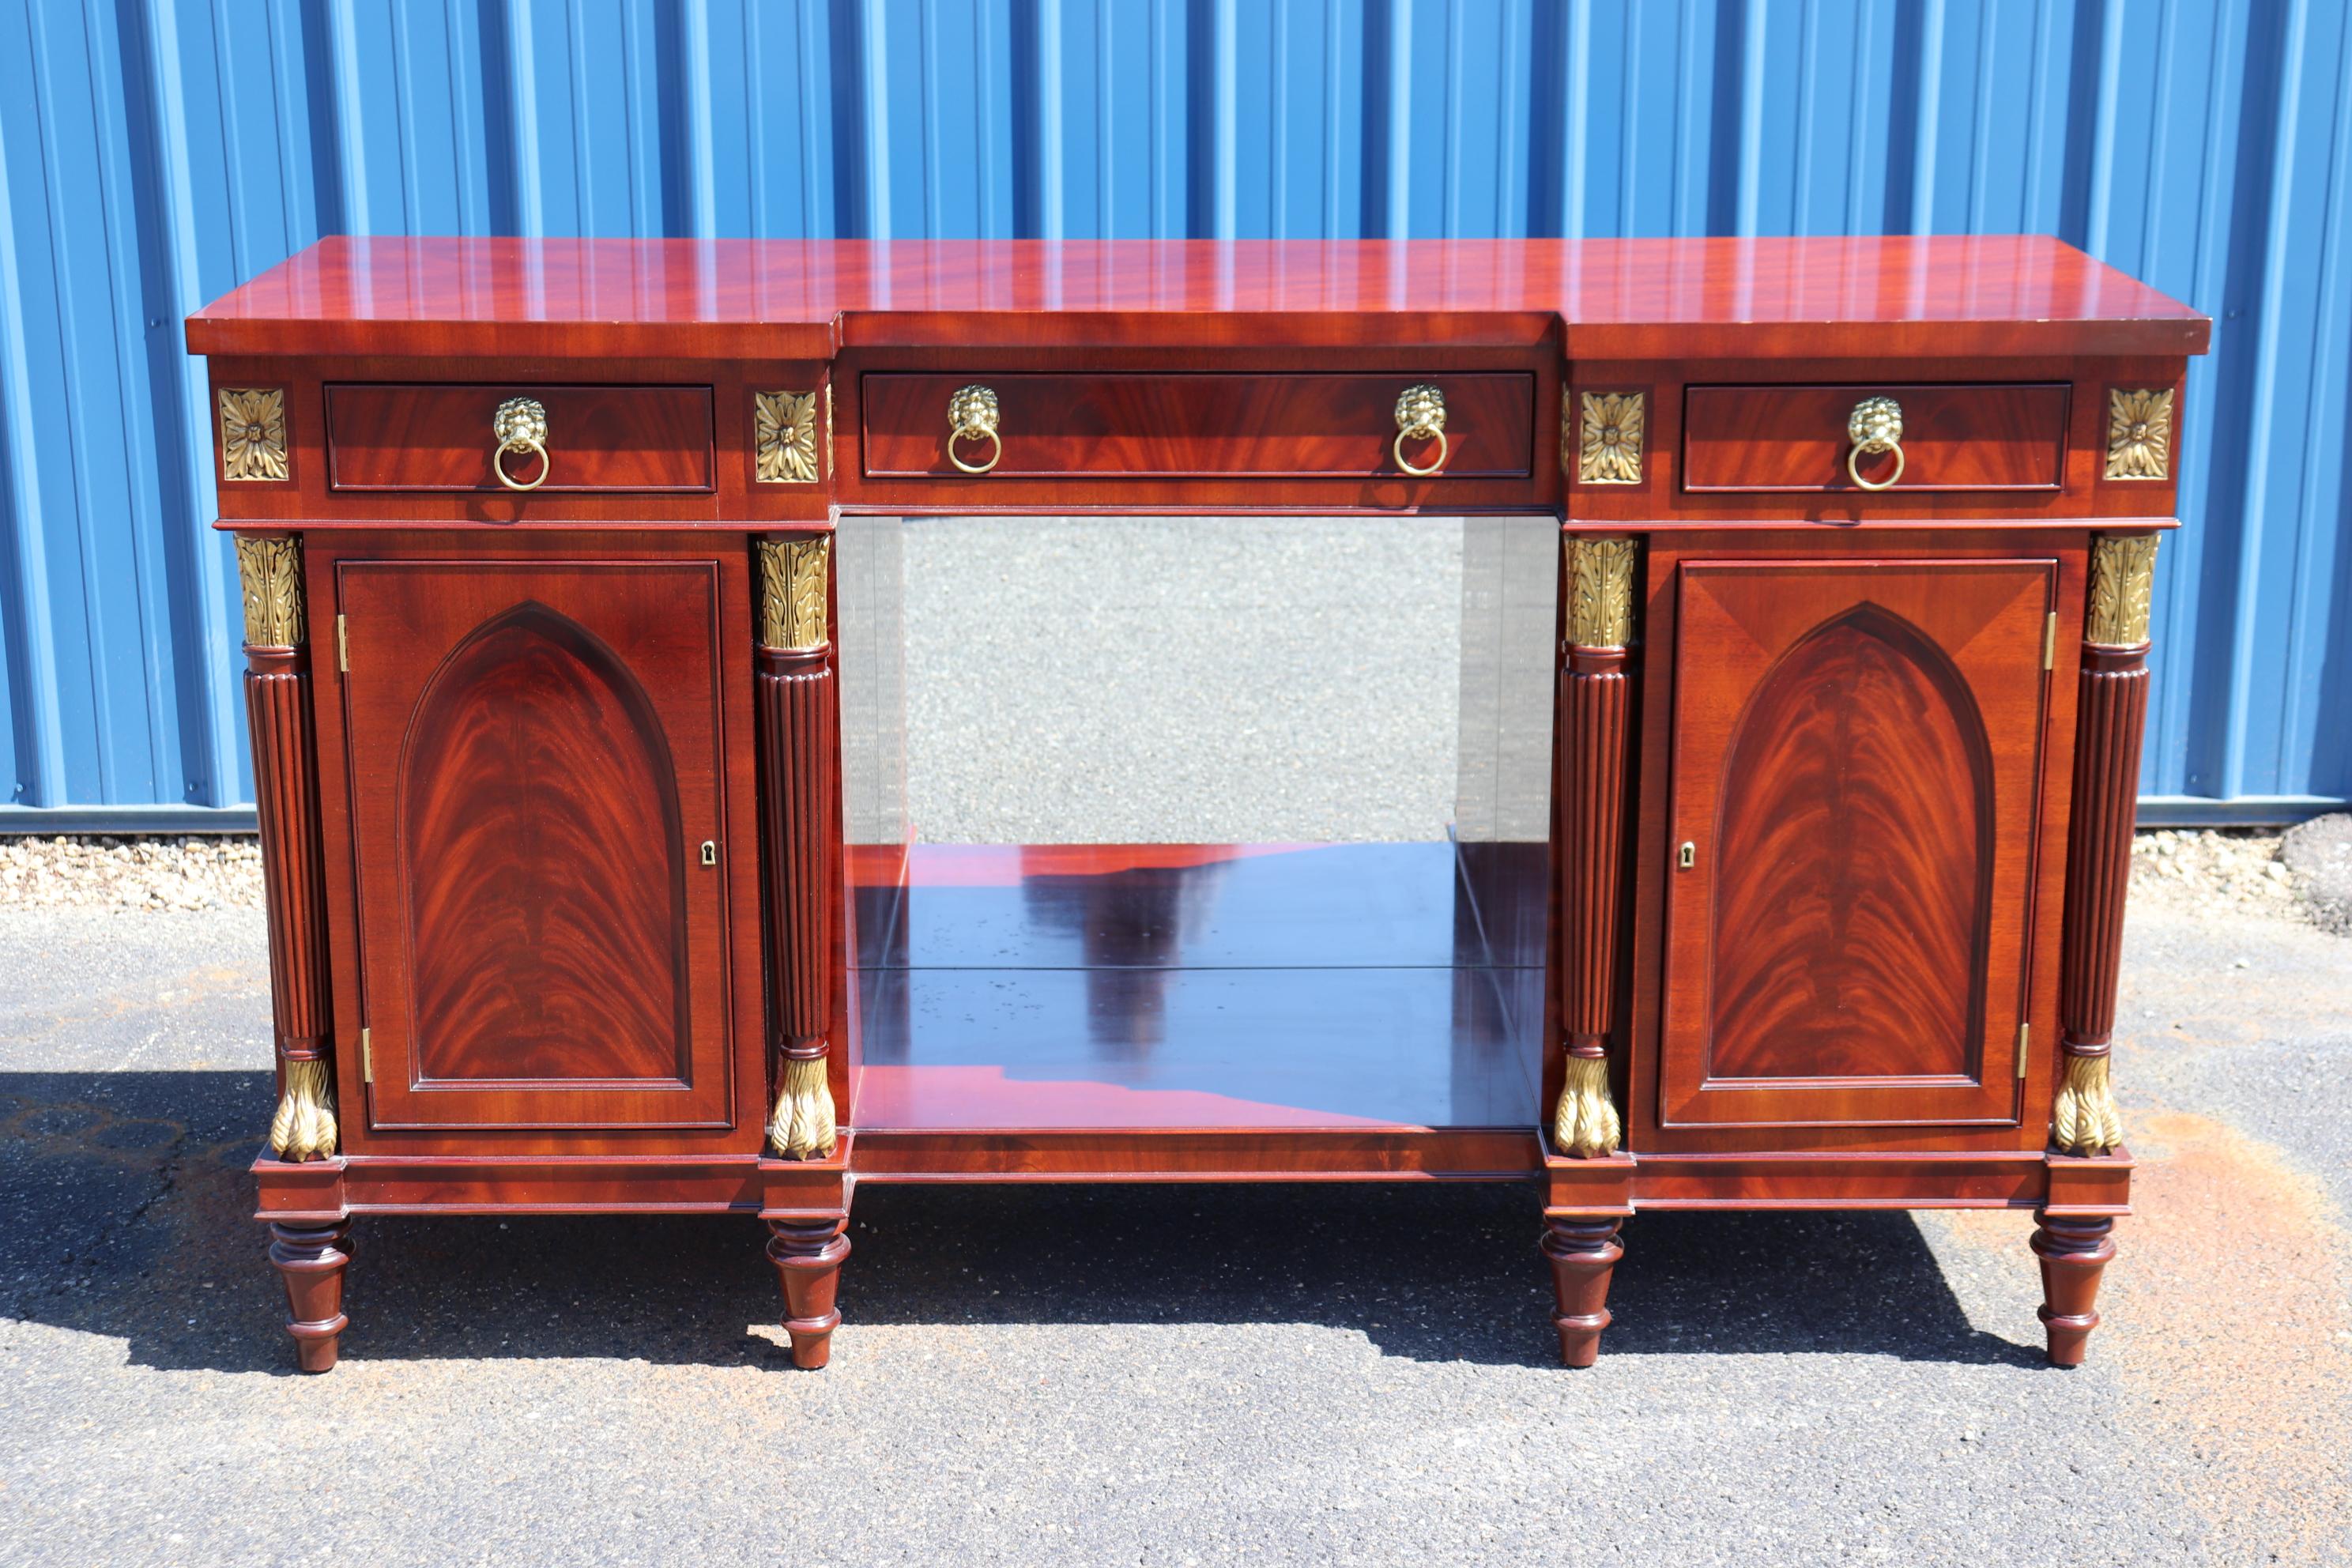 This is a beautiful Kindel furniture sideboard from the Winterthur Adaptations collection. This piece features gothic paneled flame mahogany doors and gorgeous gold leaf and has a mirrored interior inside the bottom. The sideboard is in good